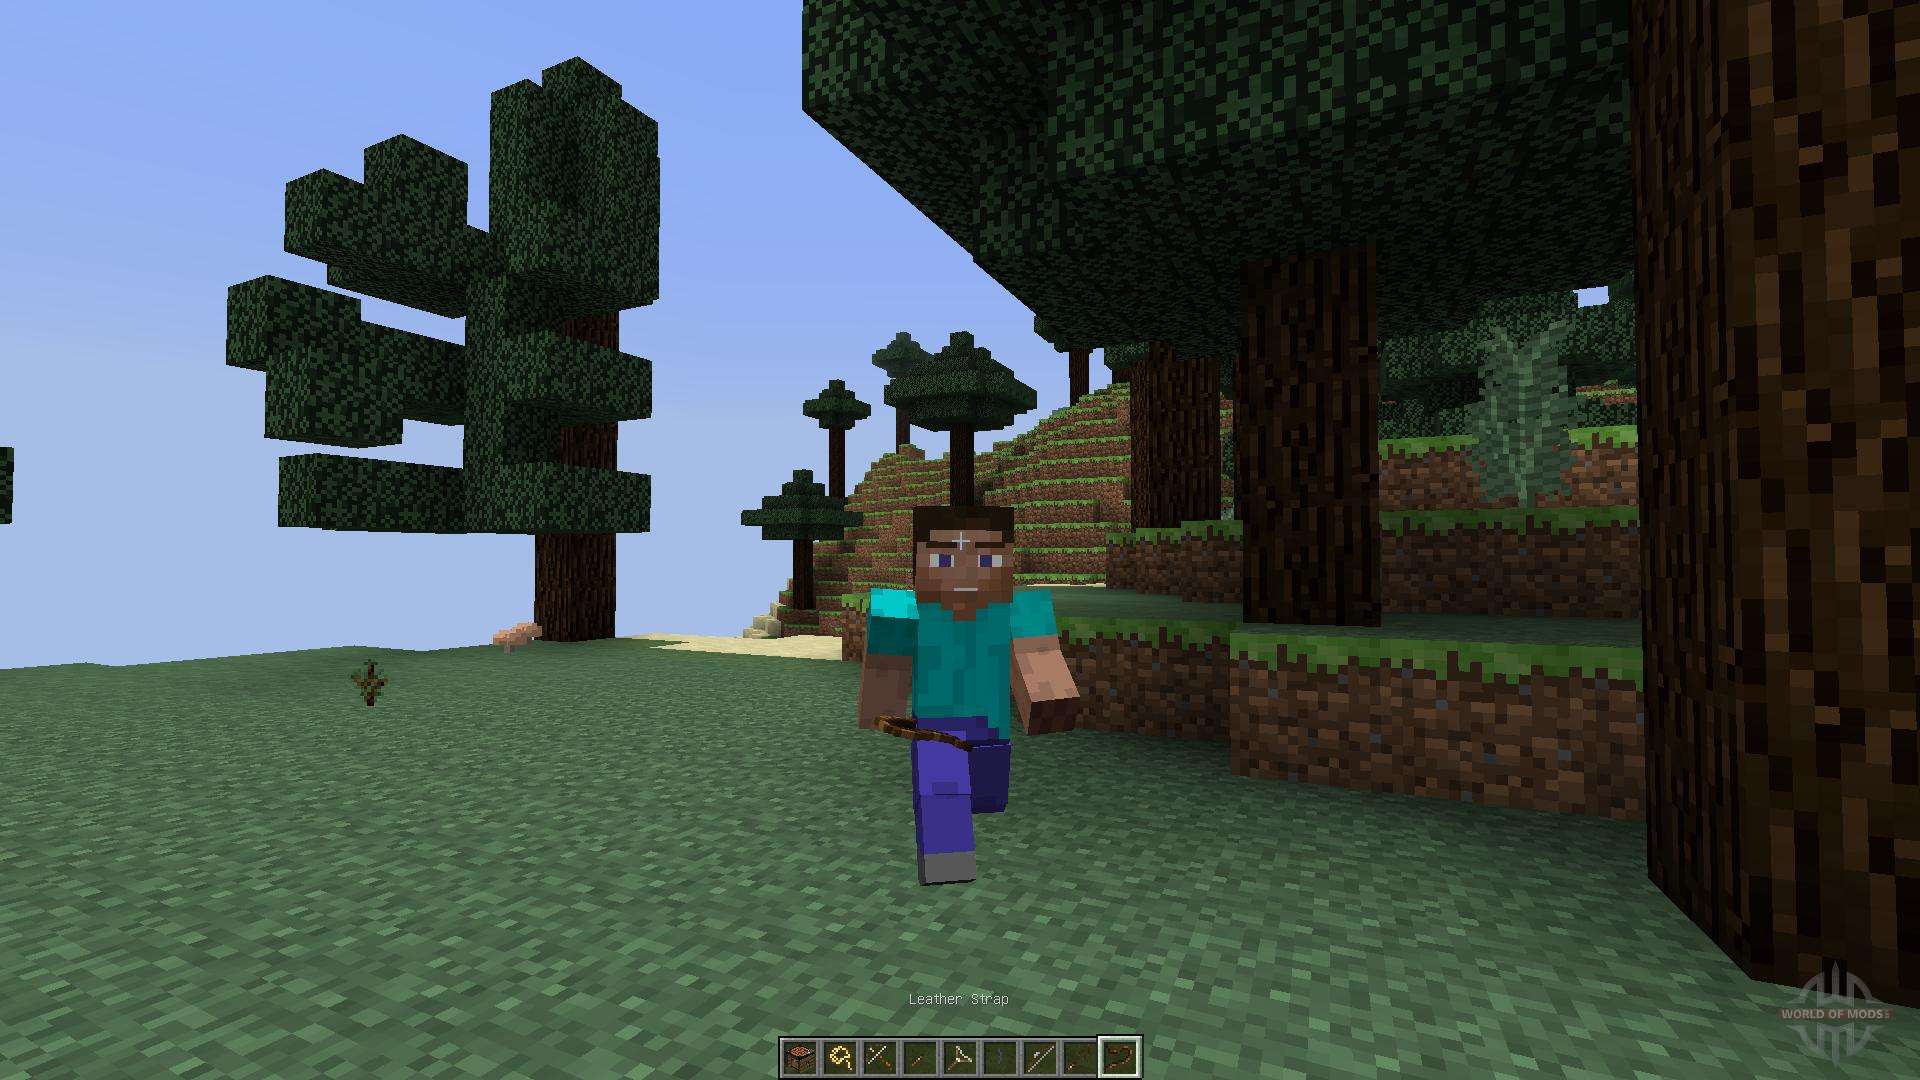 minecraft more player models 2 mod 1.7.10